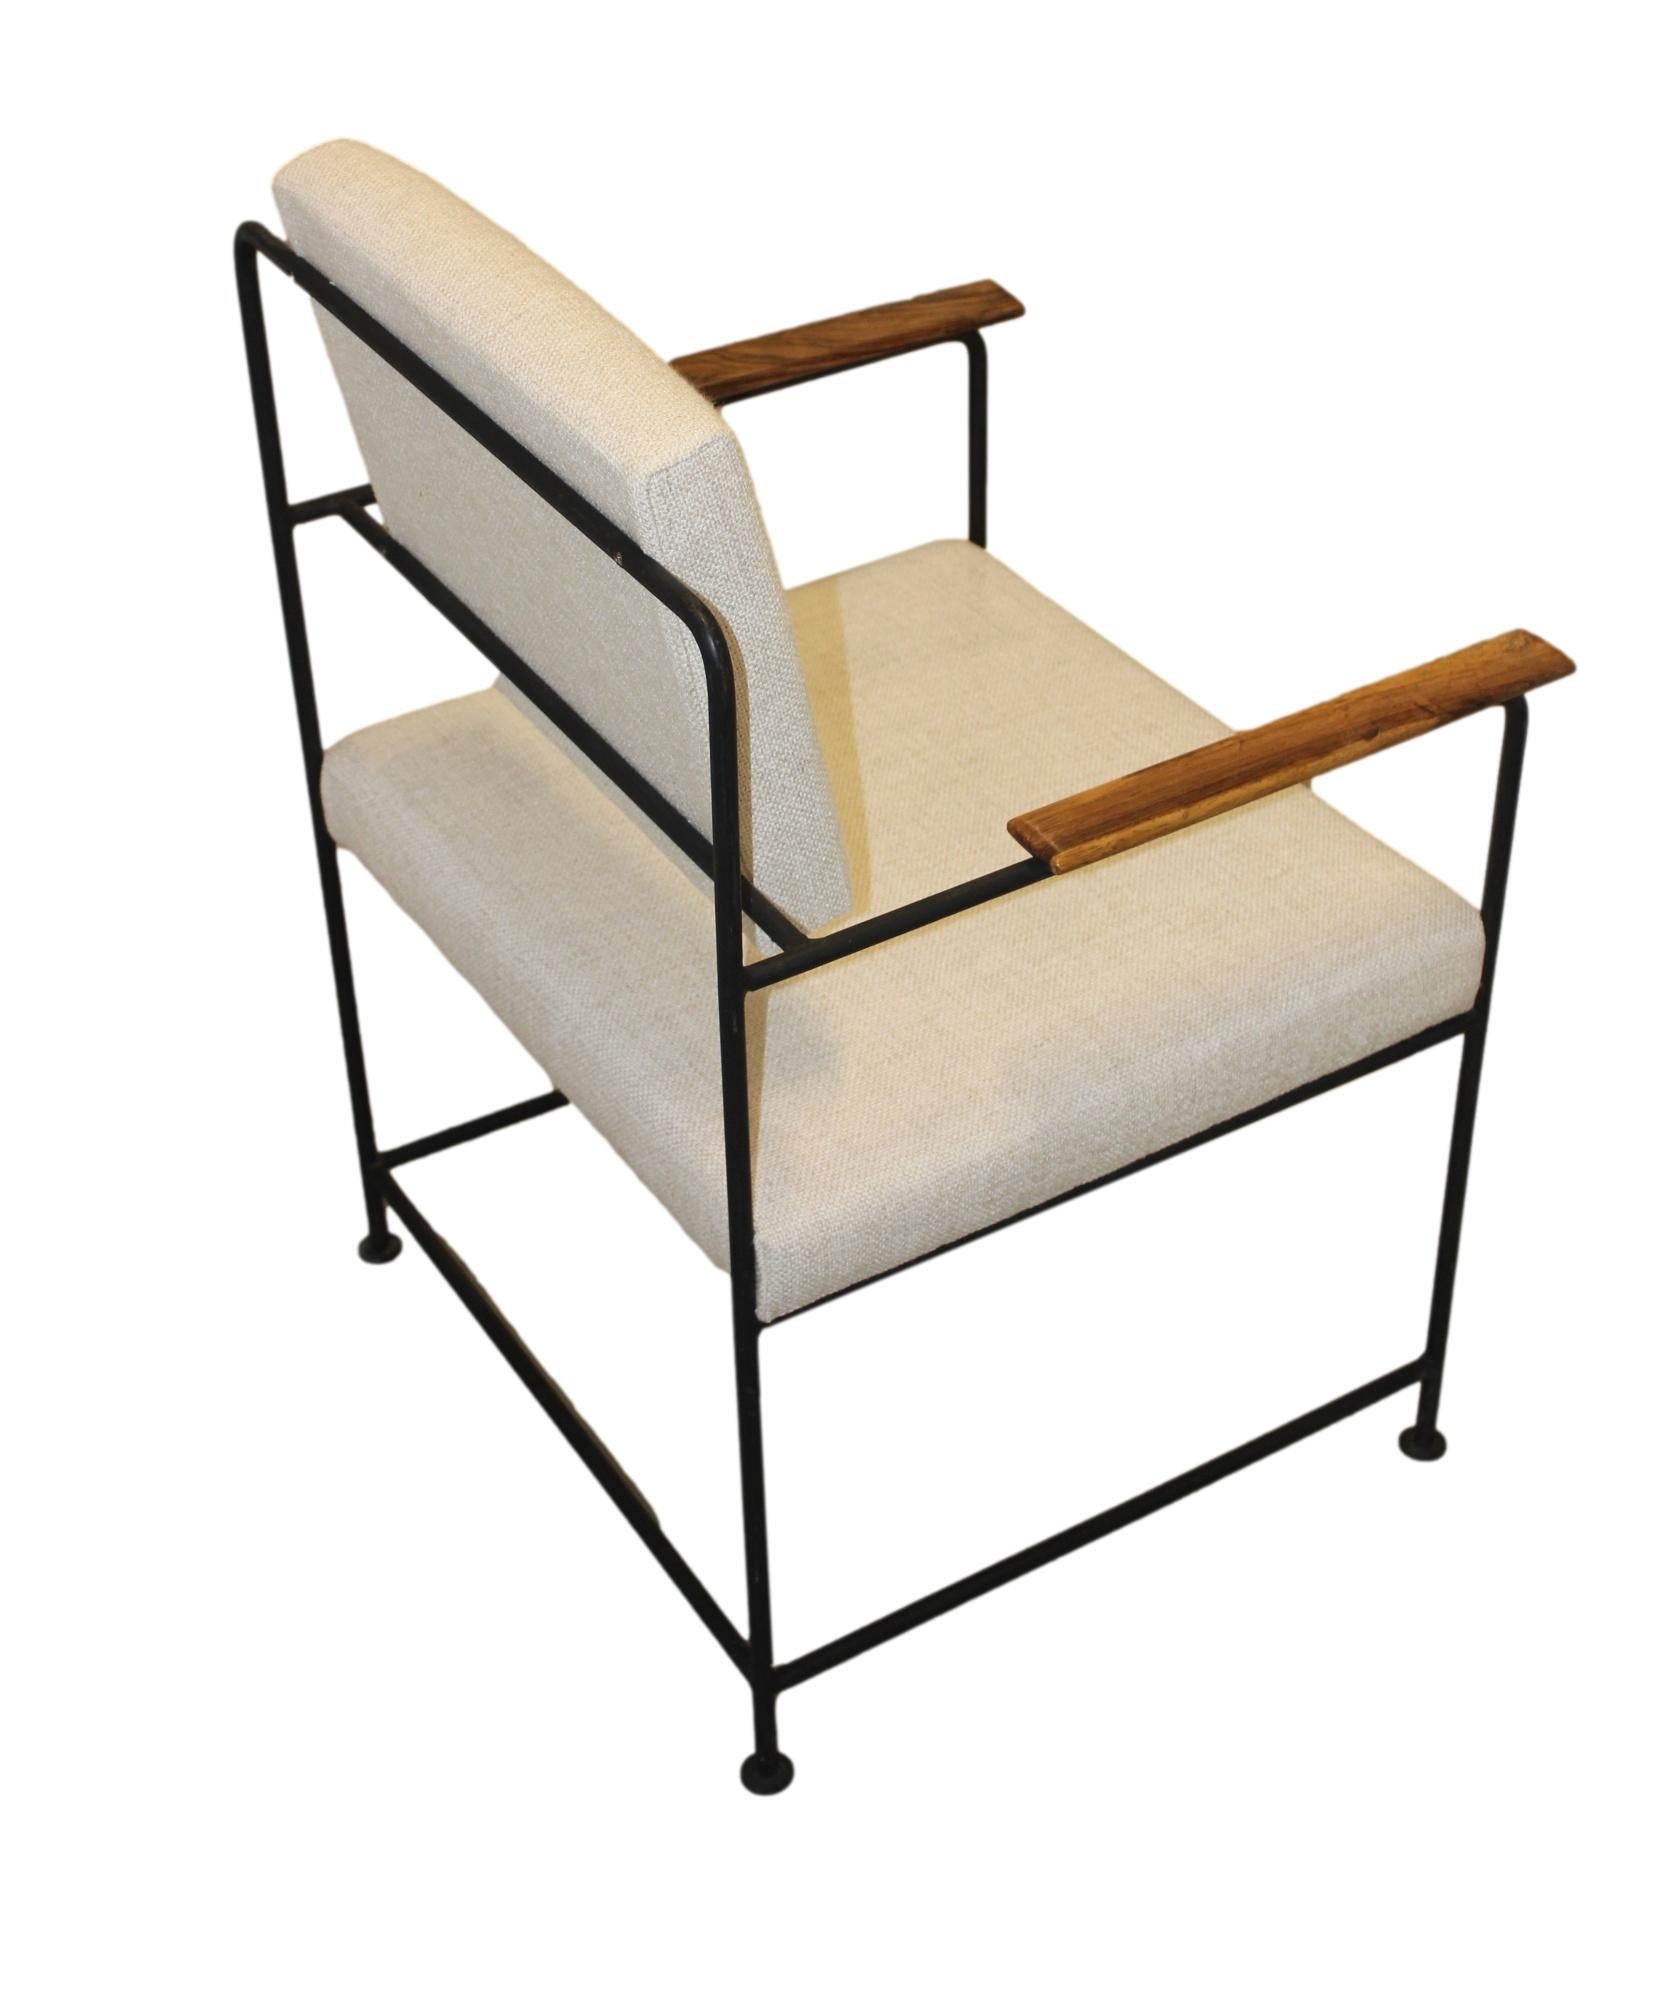 Geraldo de Barros (1923-1998)

Set of two Iron  armchair
Manufactured by Unilabor
Brazil, 1955.
Iron frame, fabric upholstered.

Measurements:
55 cm x 65 cm x 75 h cm
21.6 in x 25.59 in x 29.5 H in.

Literature
Unilabor, by Mauro Claro. Brasil,